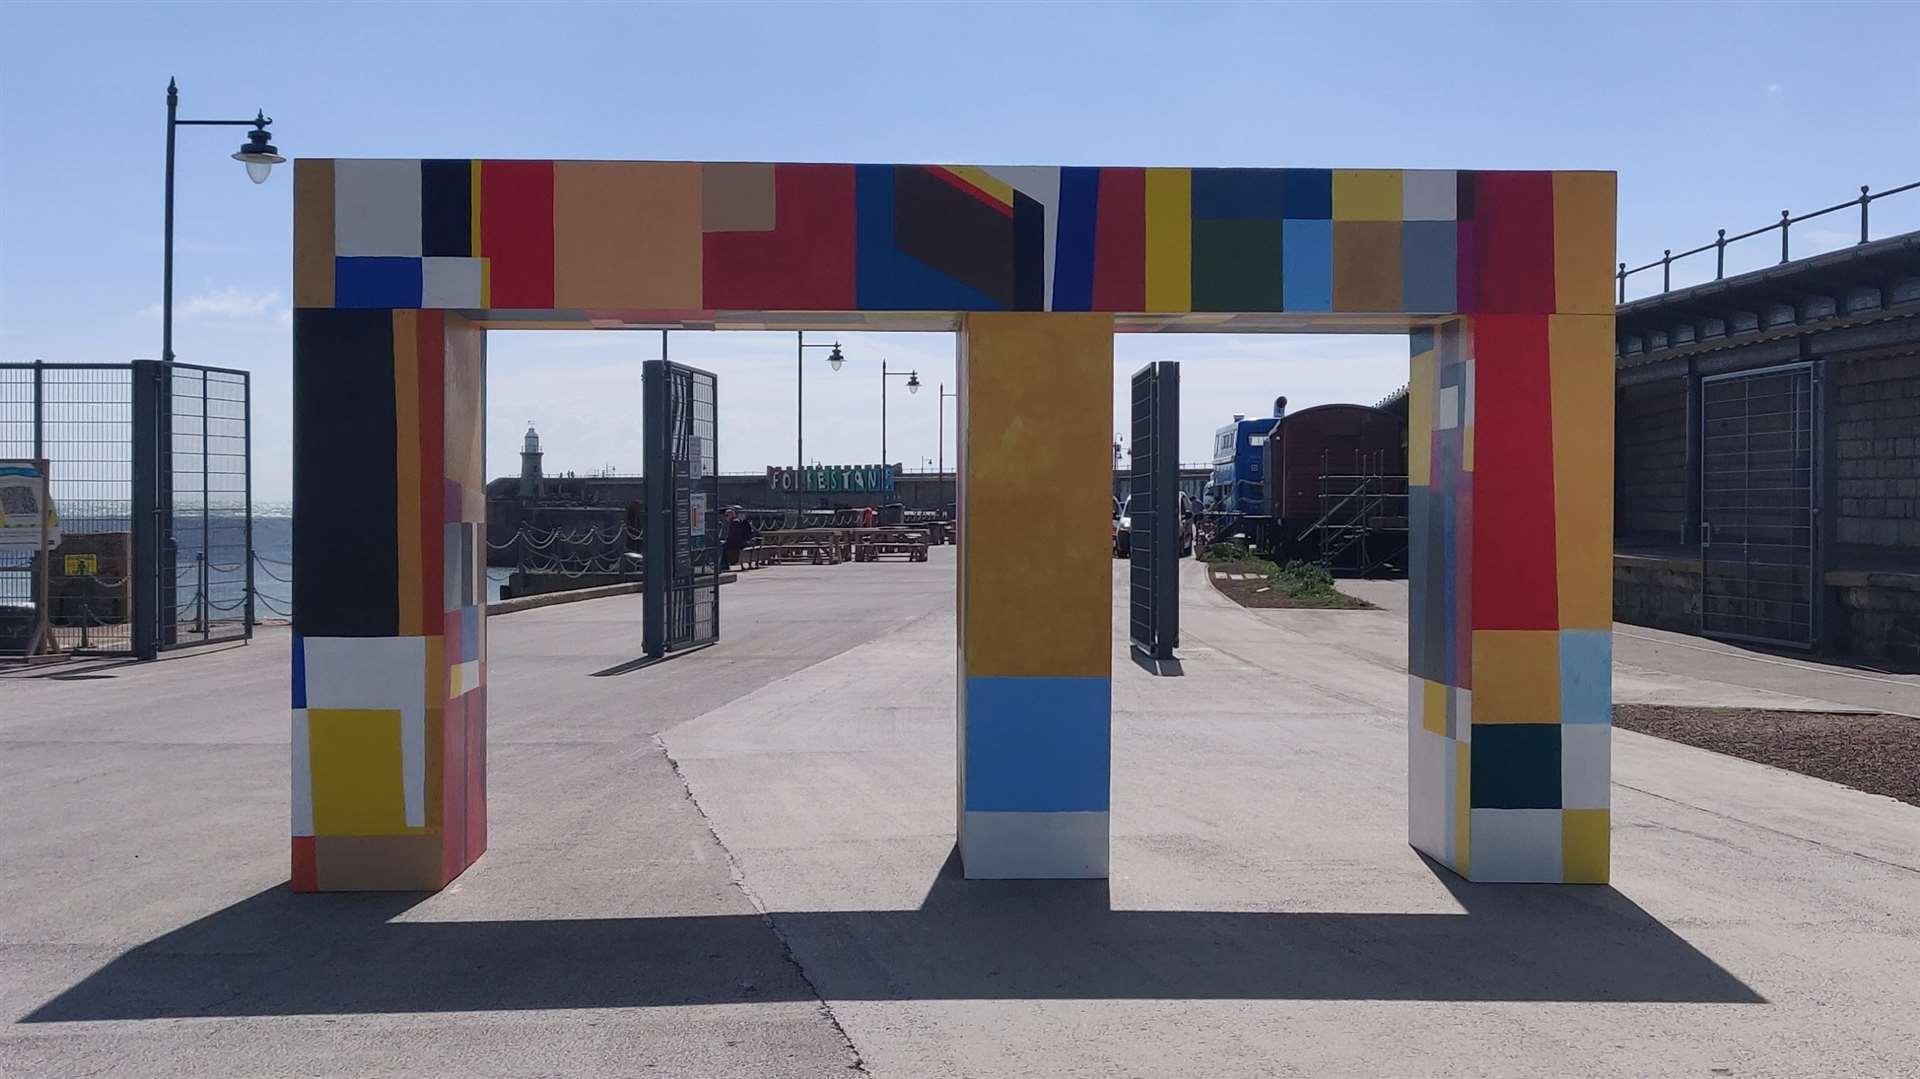 Gateways of the Sea by artist Atta Kwami at the Folkestone Harbour Arm